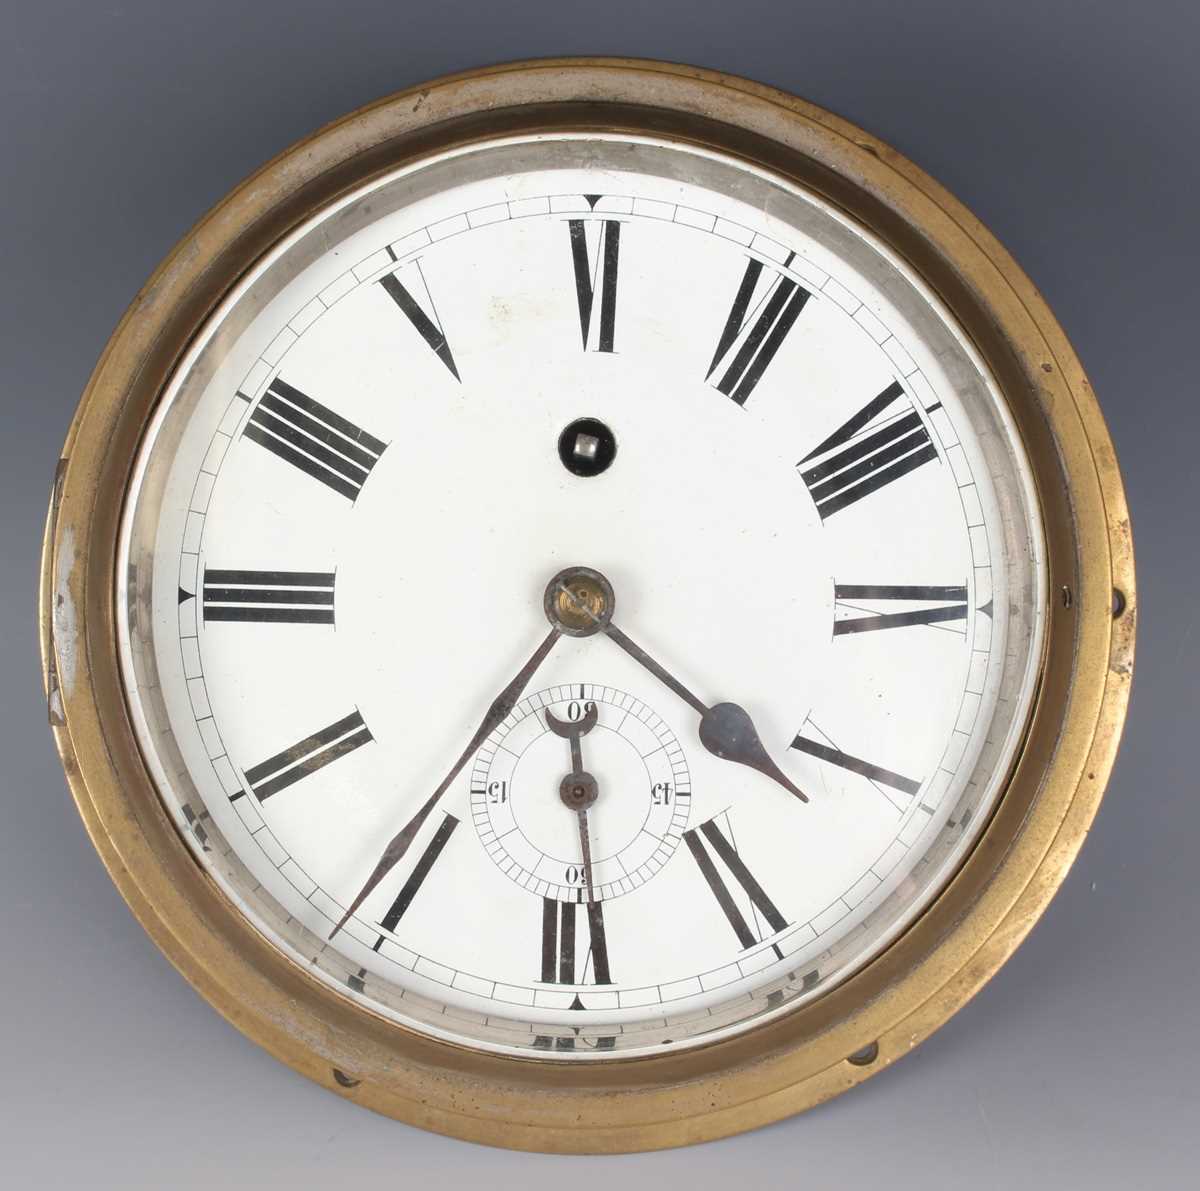 An early 20th century brass circular cased ship's style wall timepiece, the 7-inch white enamelled